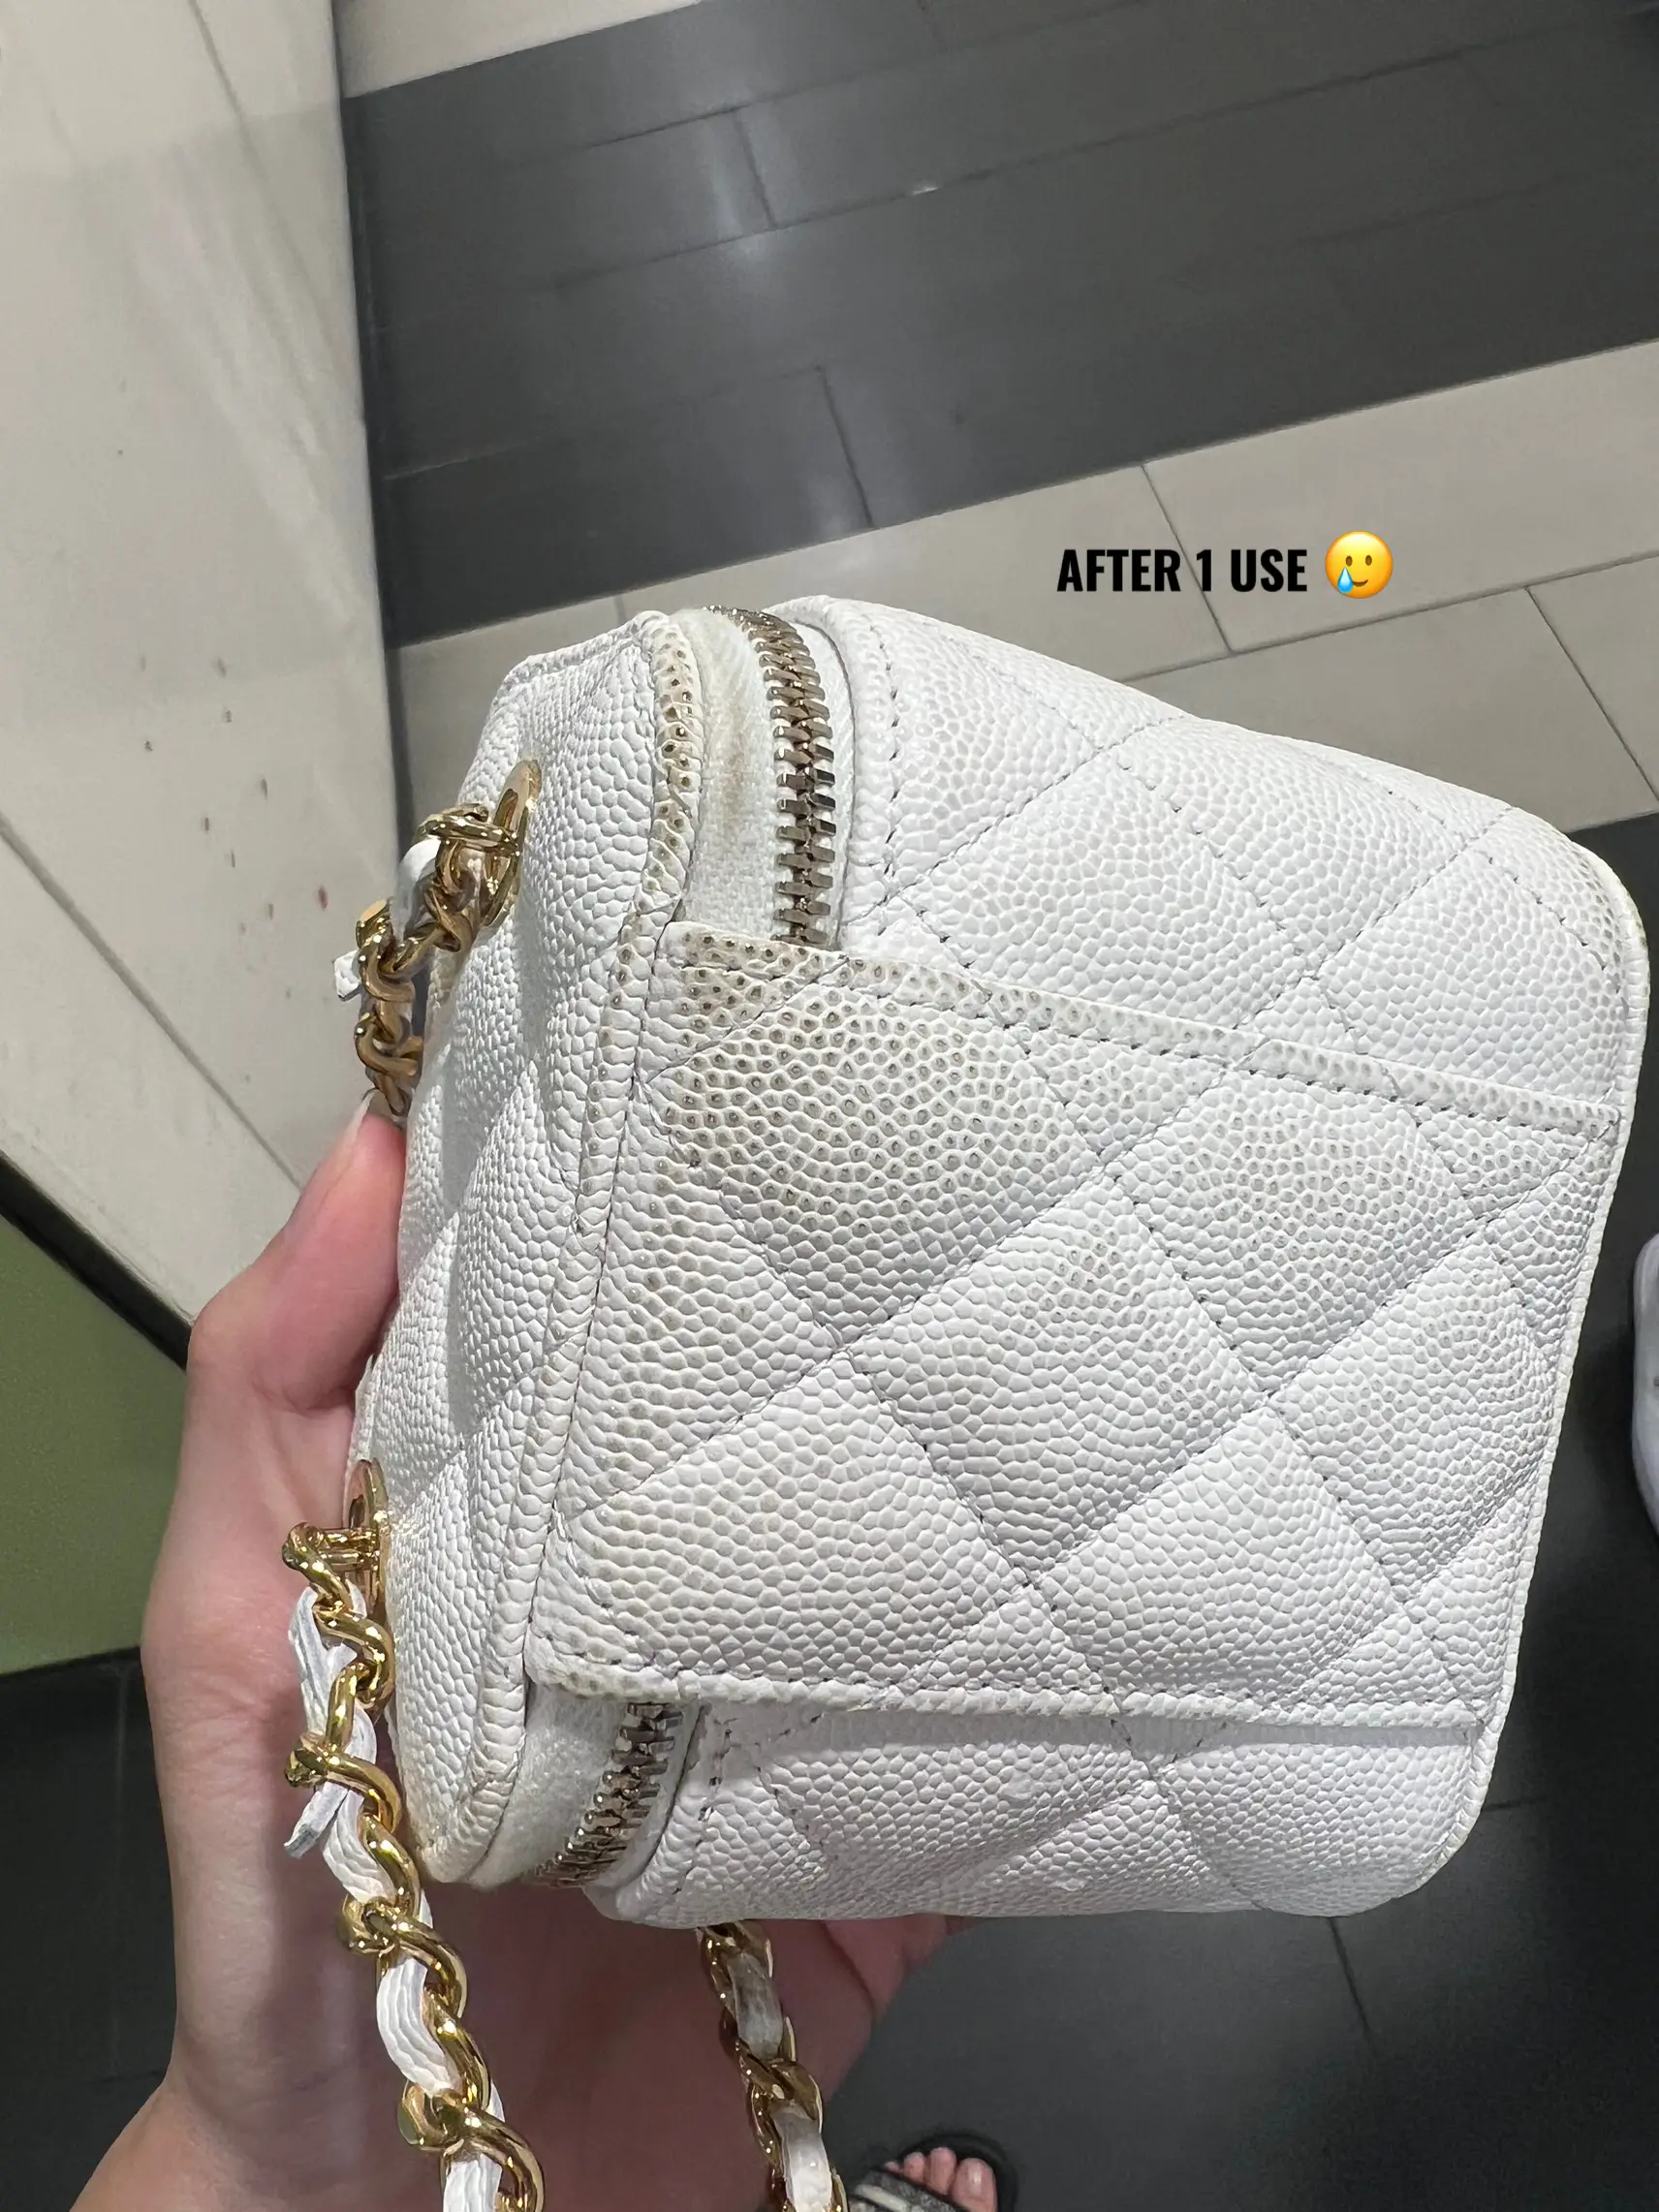 LUXURY, I stained my White Chanel aft 1 use😩, Gallery posted by  𝓘𝓼𝓪𝓫𝓮𝓵